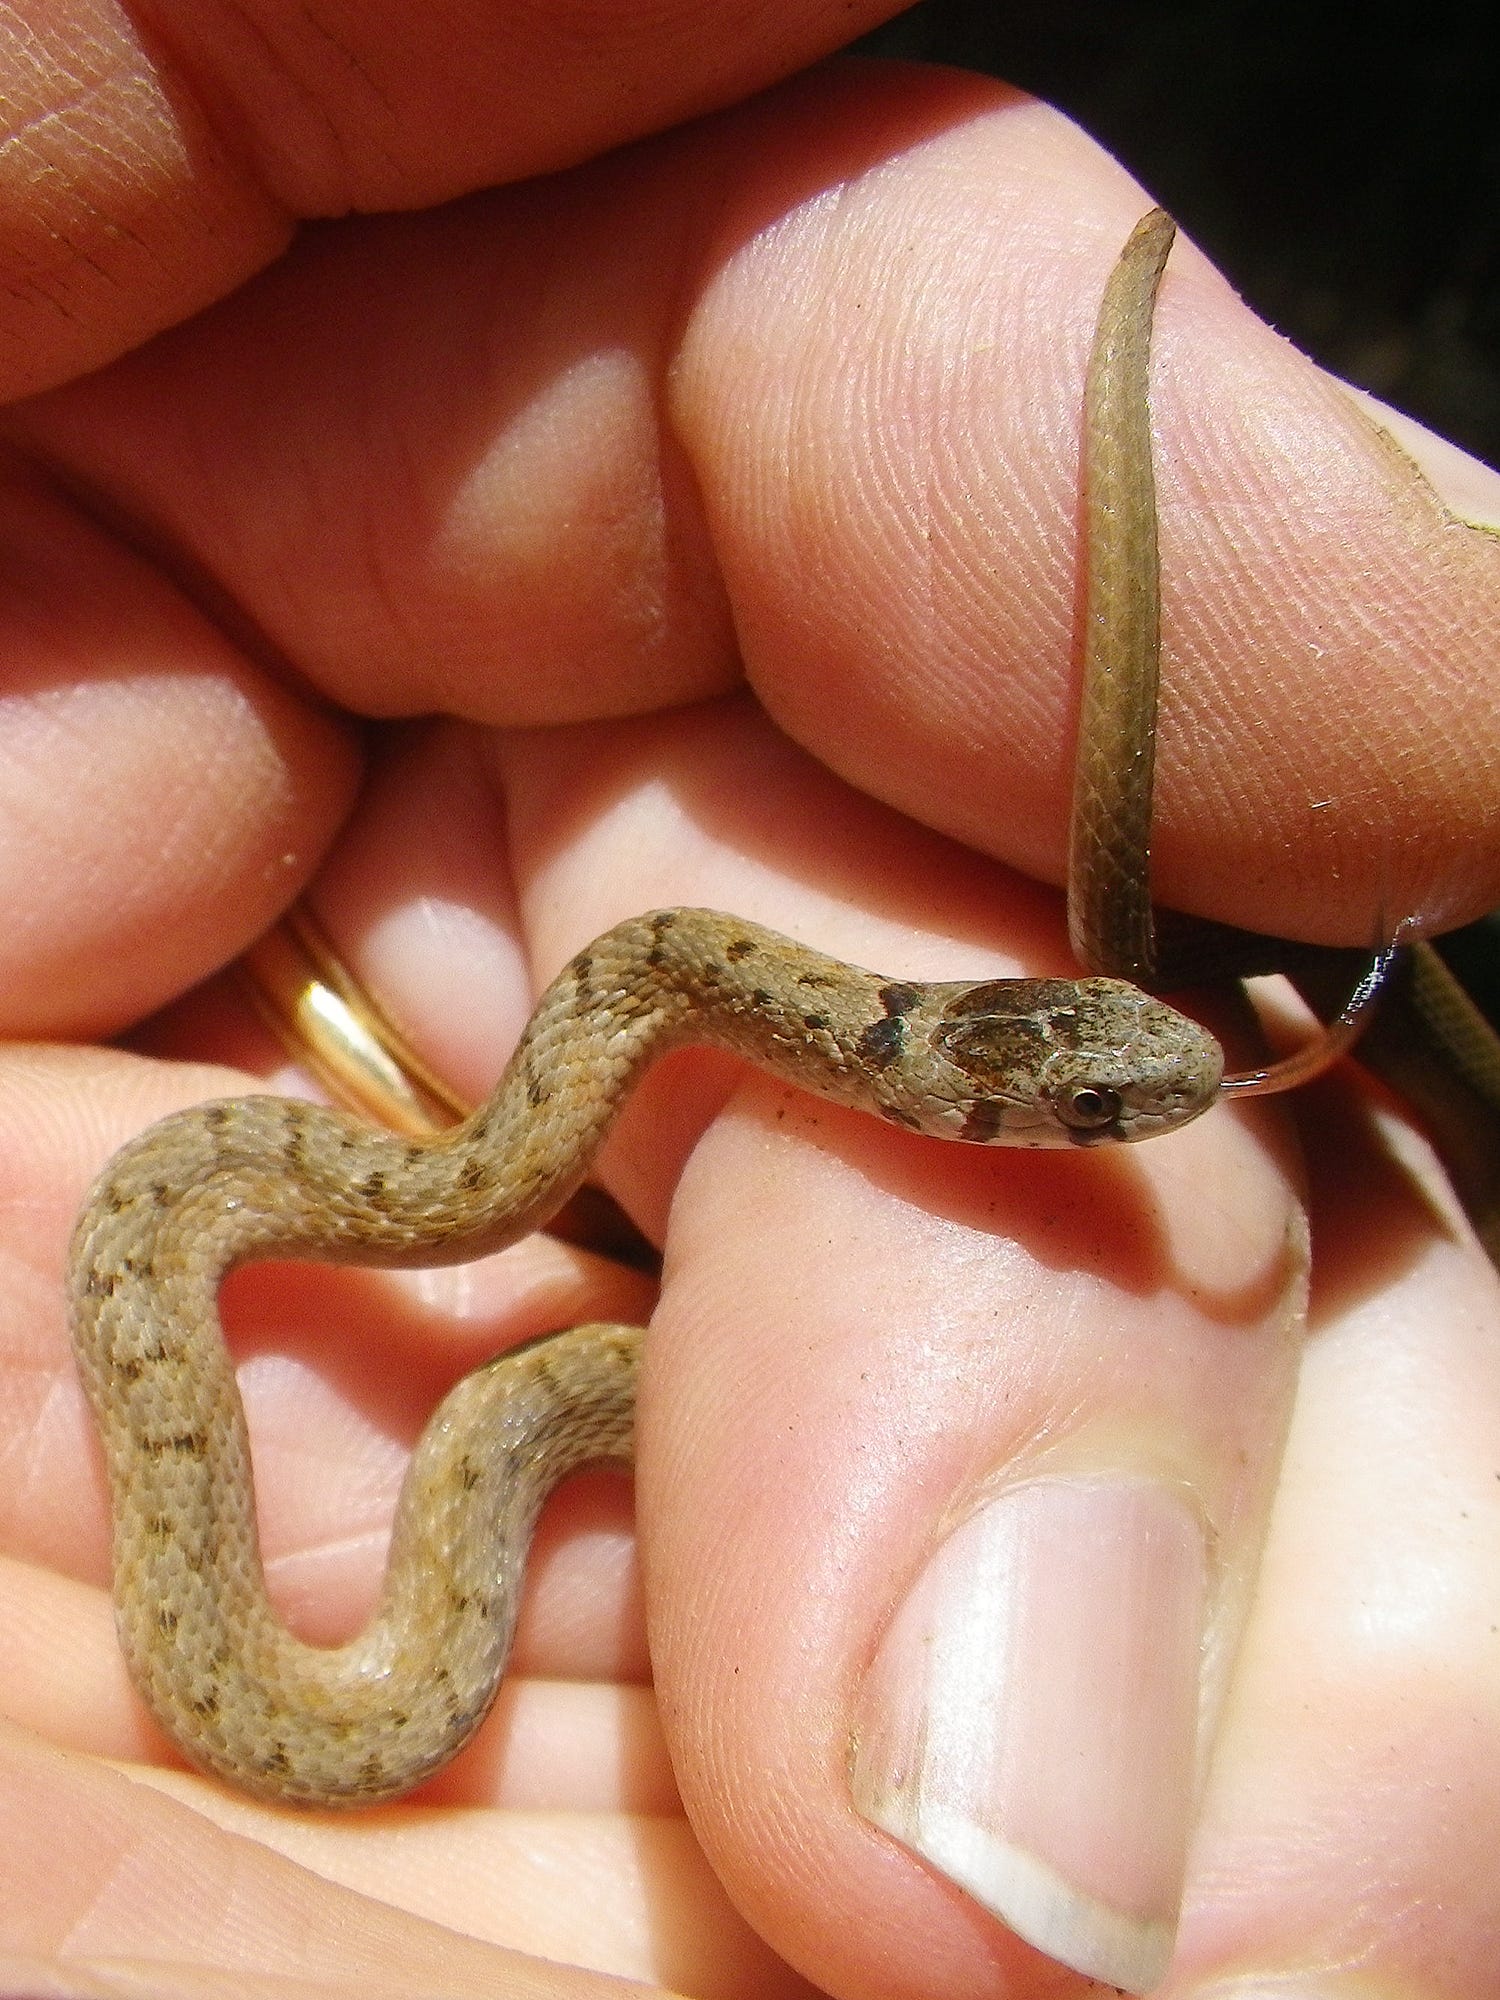 5 Snakes You May Encounter This Summer